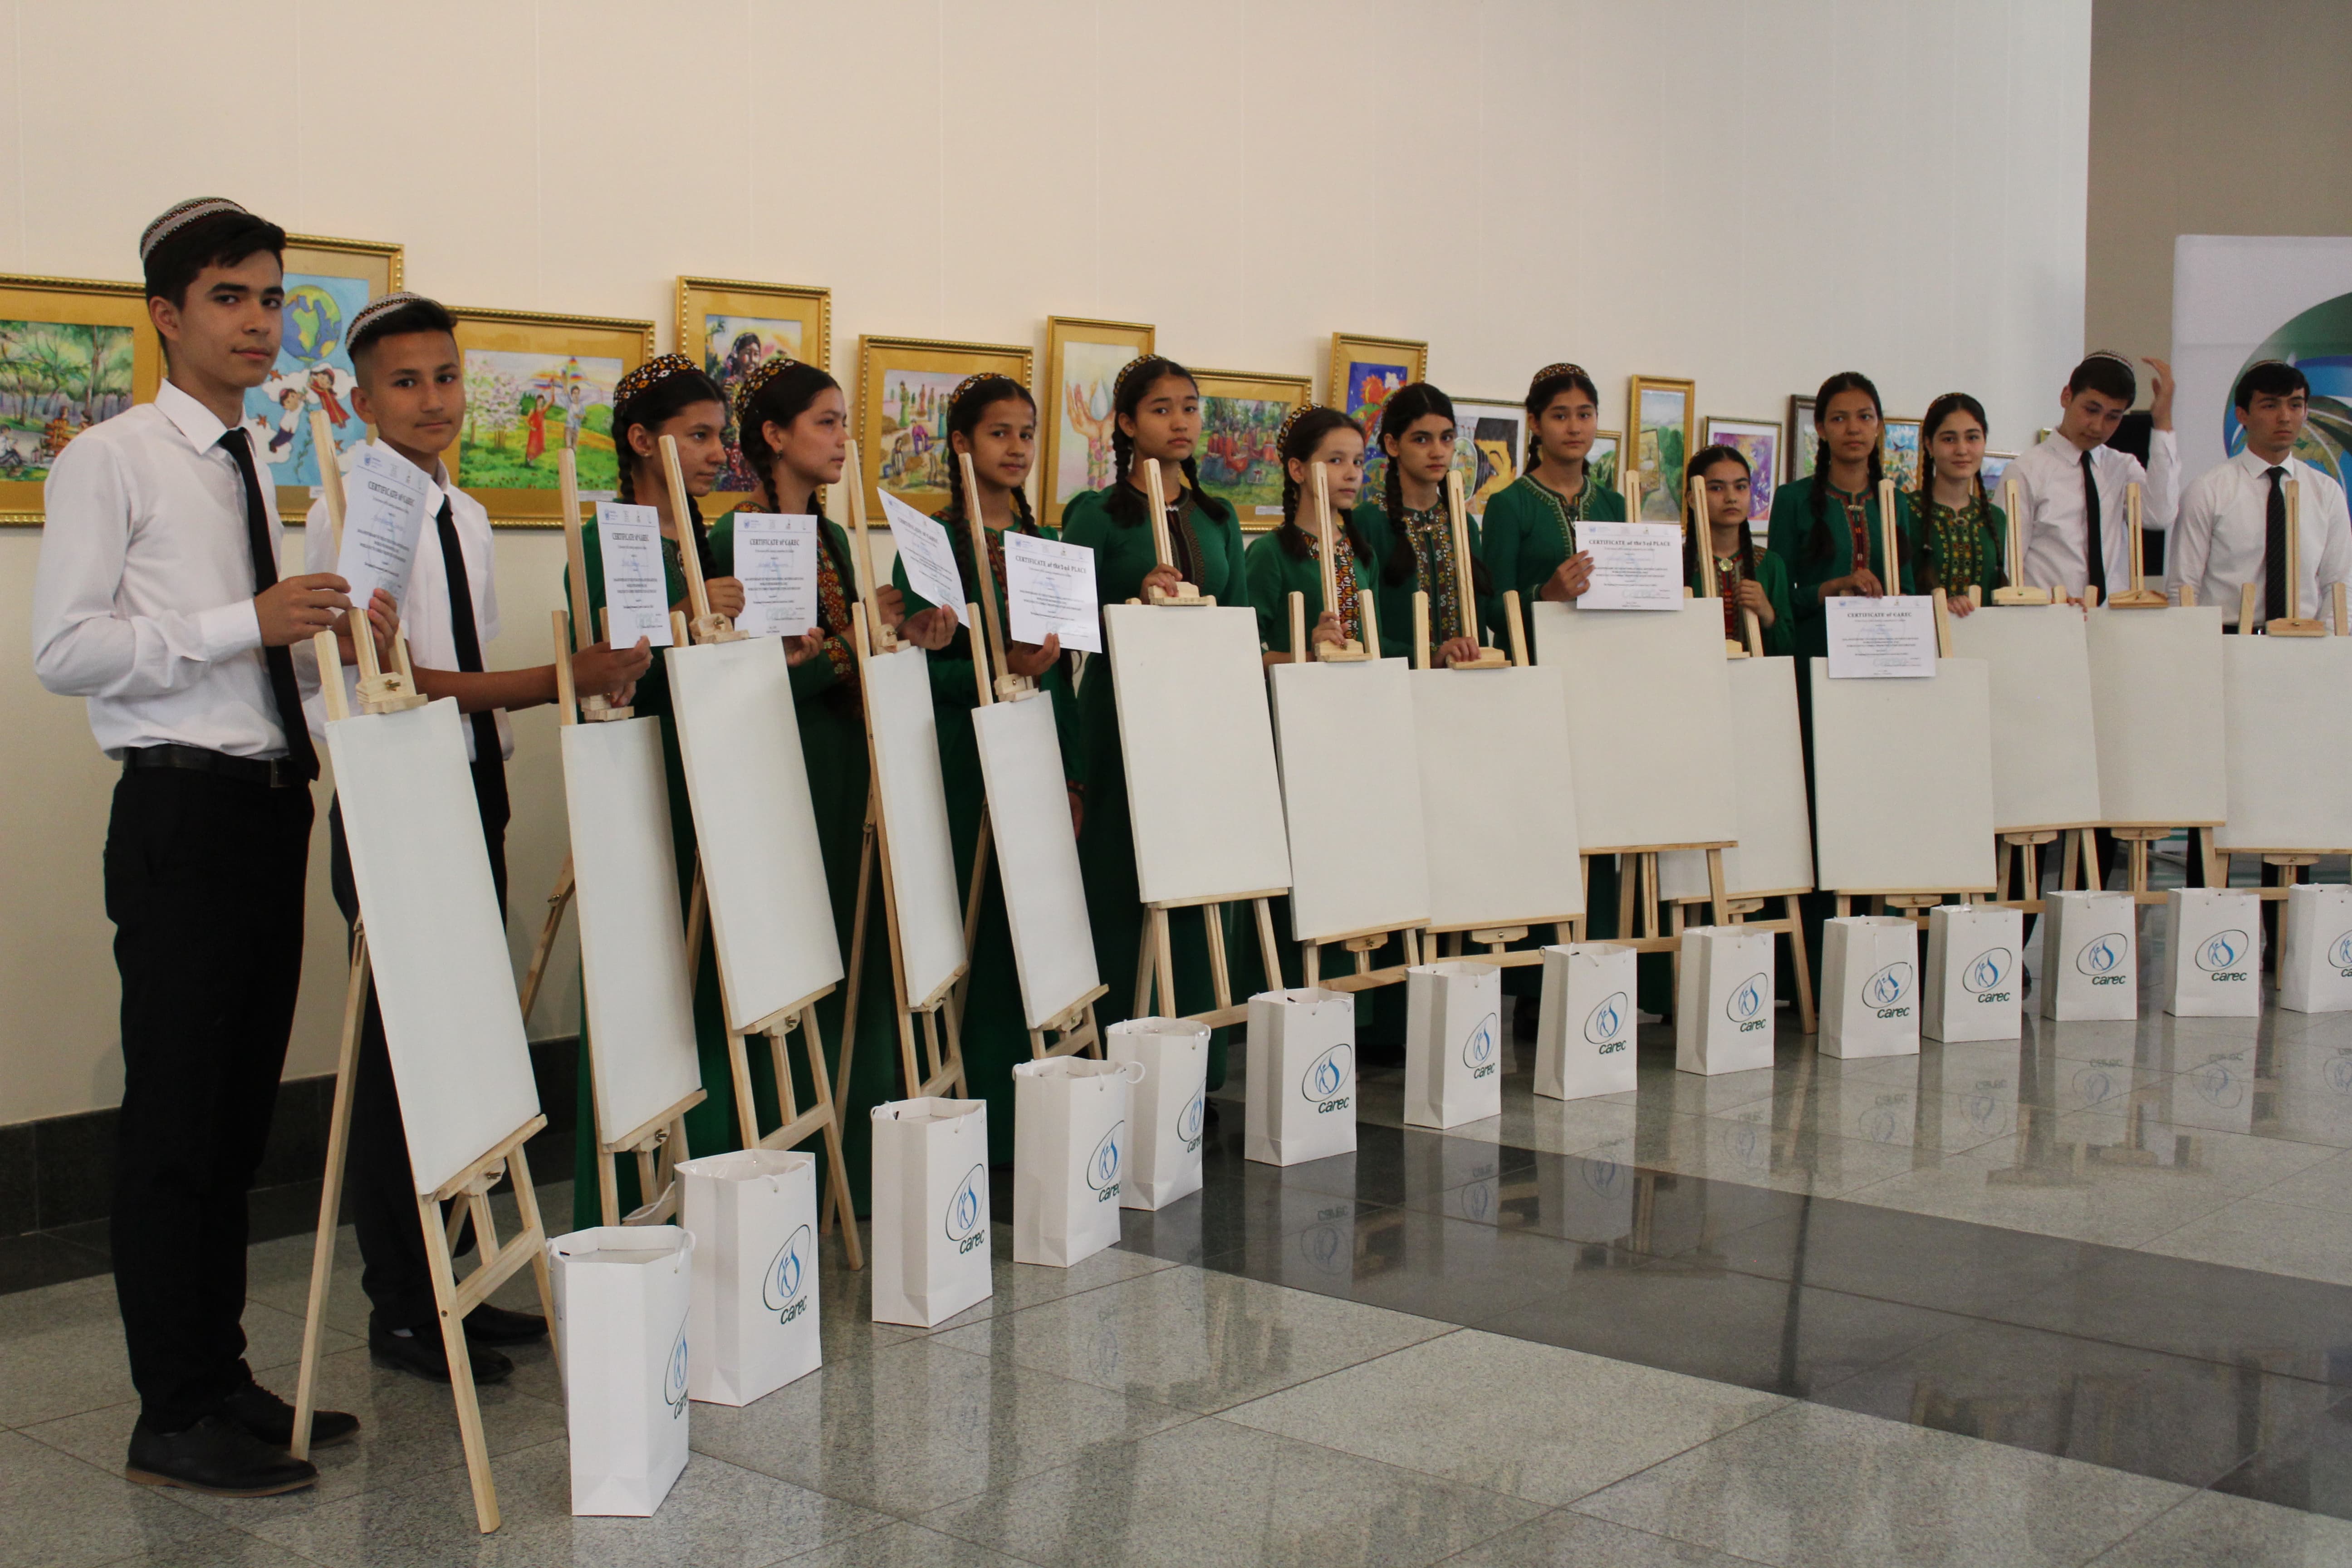 Children's drawing competition dedicated to the 50th Anniversary of the earth day, the day of nature conservation in the year of the 25th Anniversary of independence of Turkmenistan, and the day to combat desertification and drought.